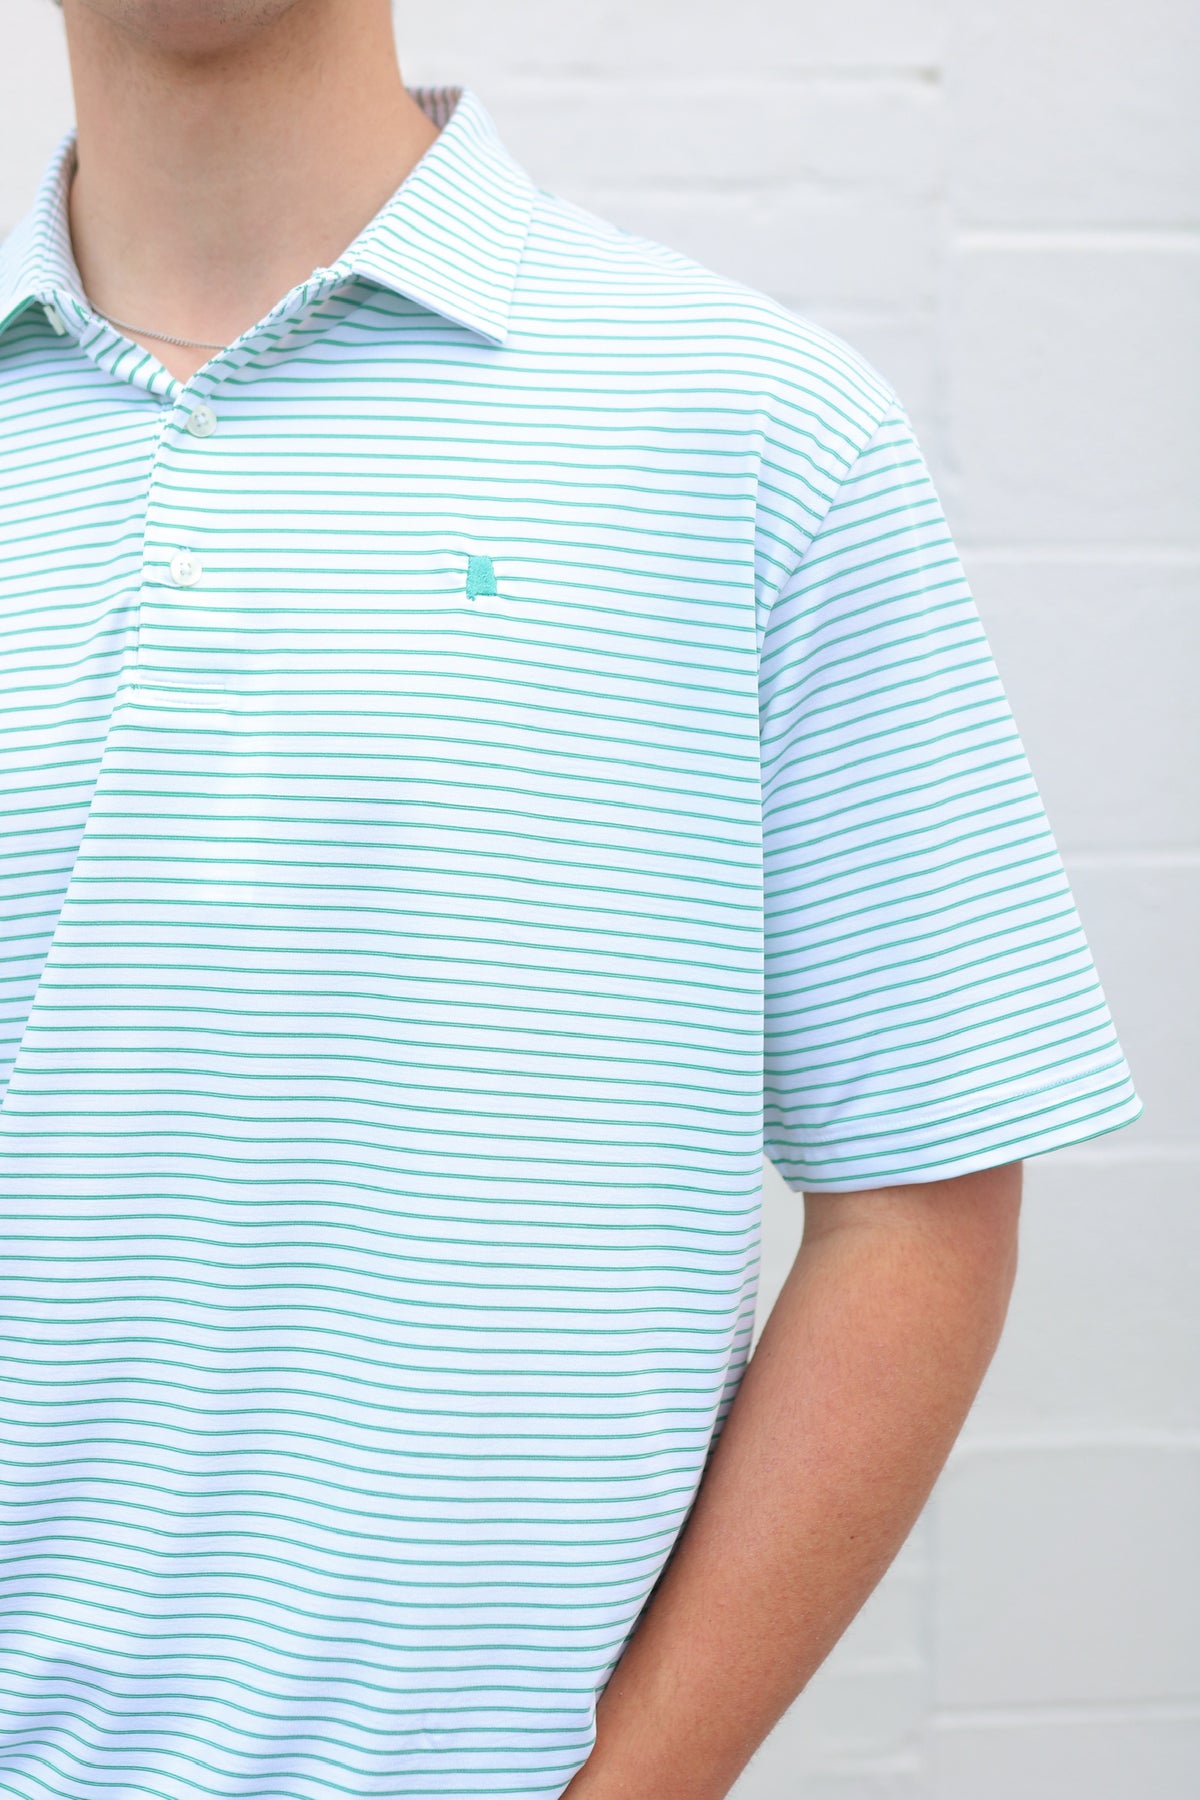 State Co Laurel Performance Polo